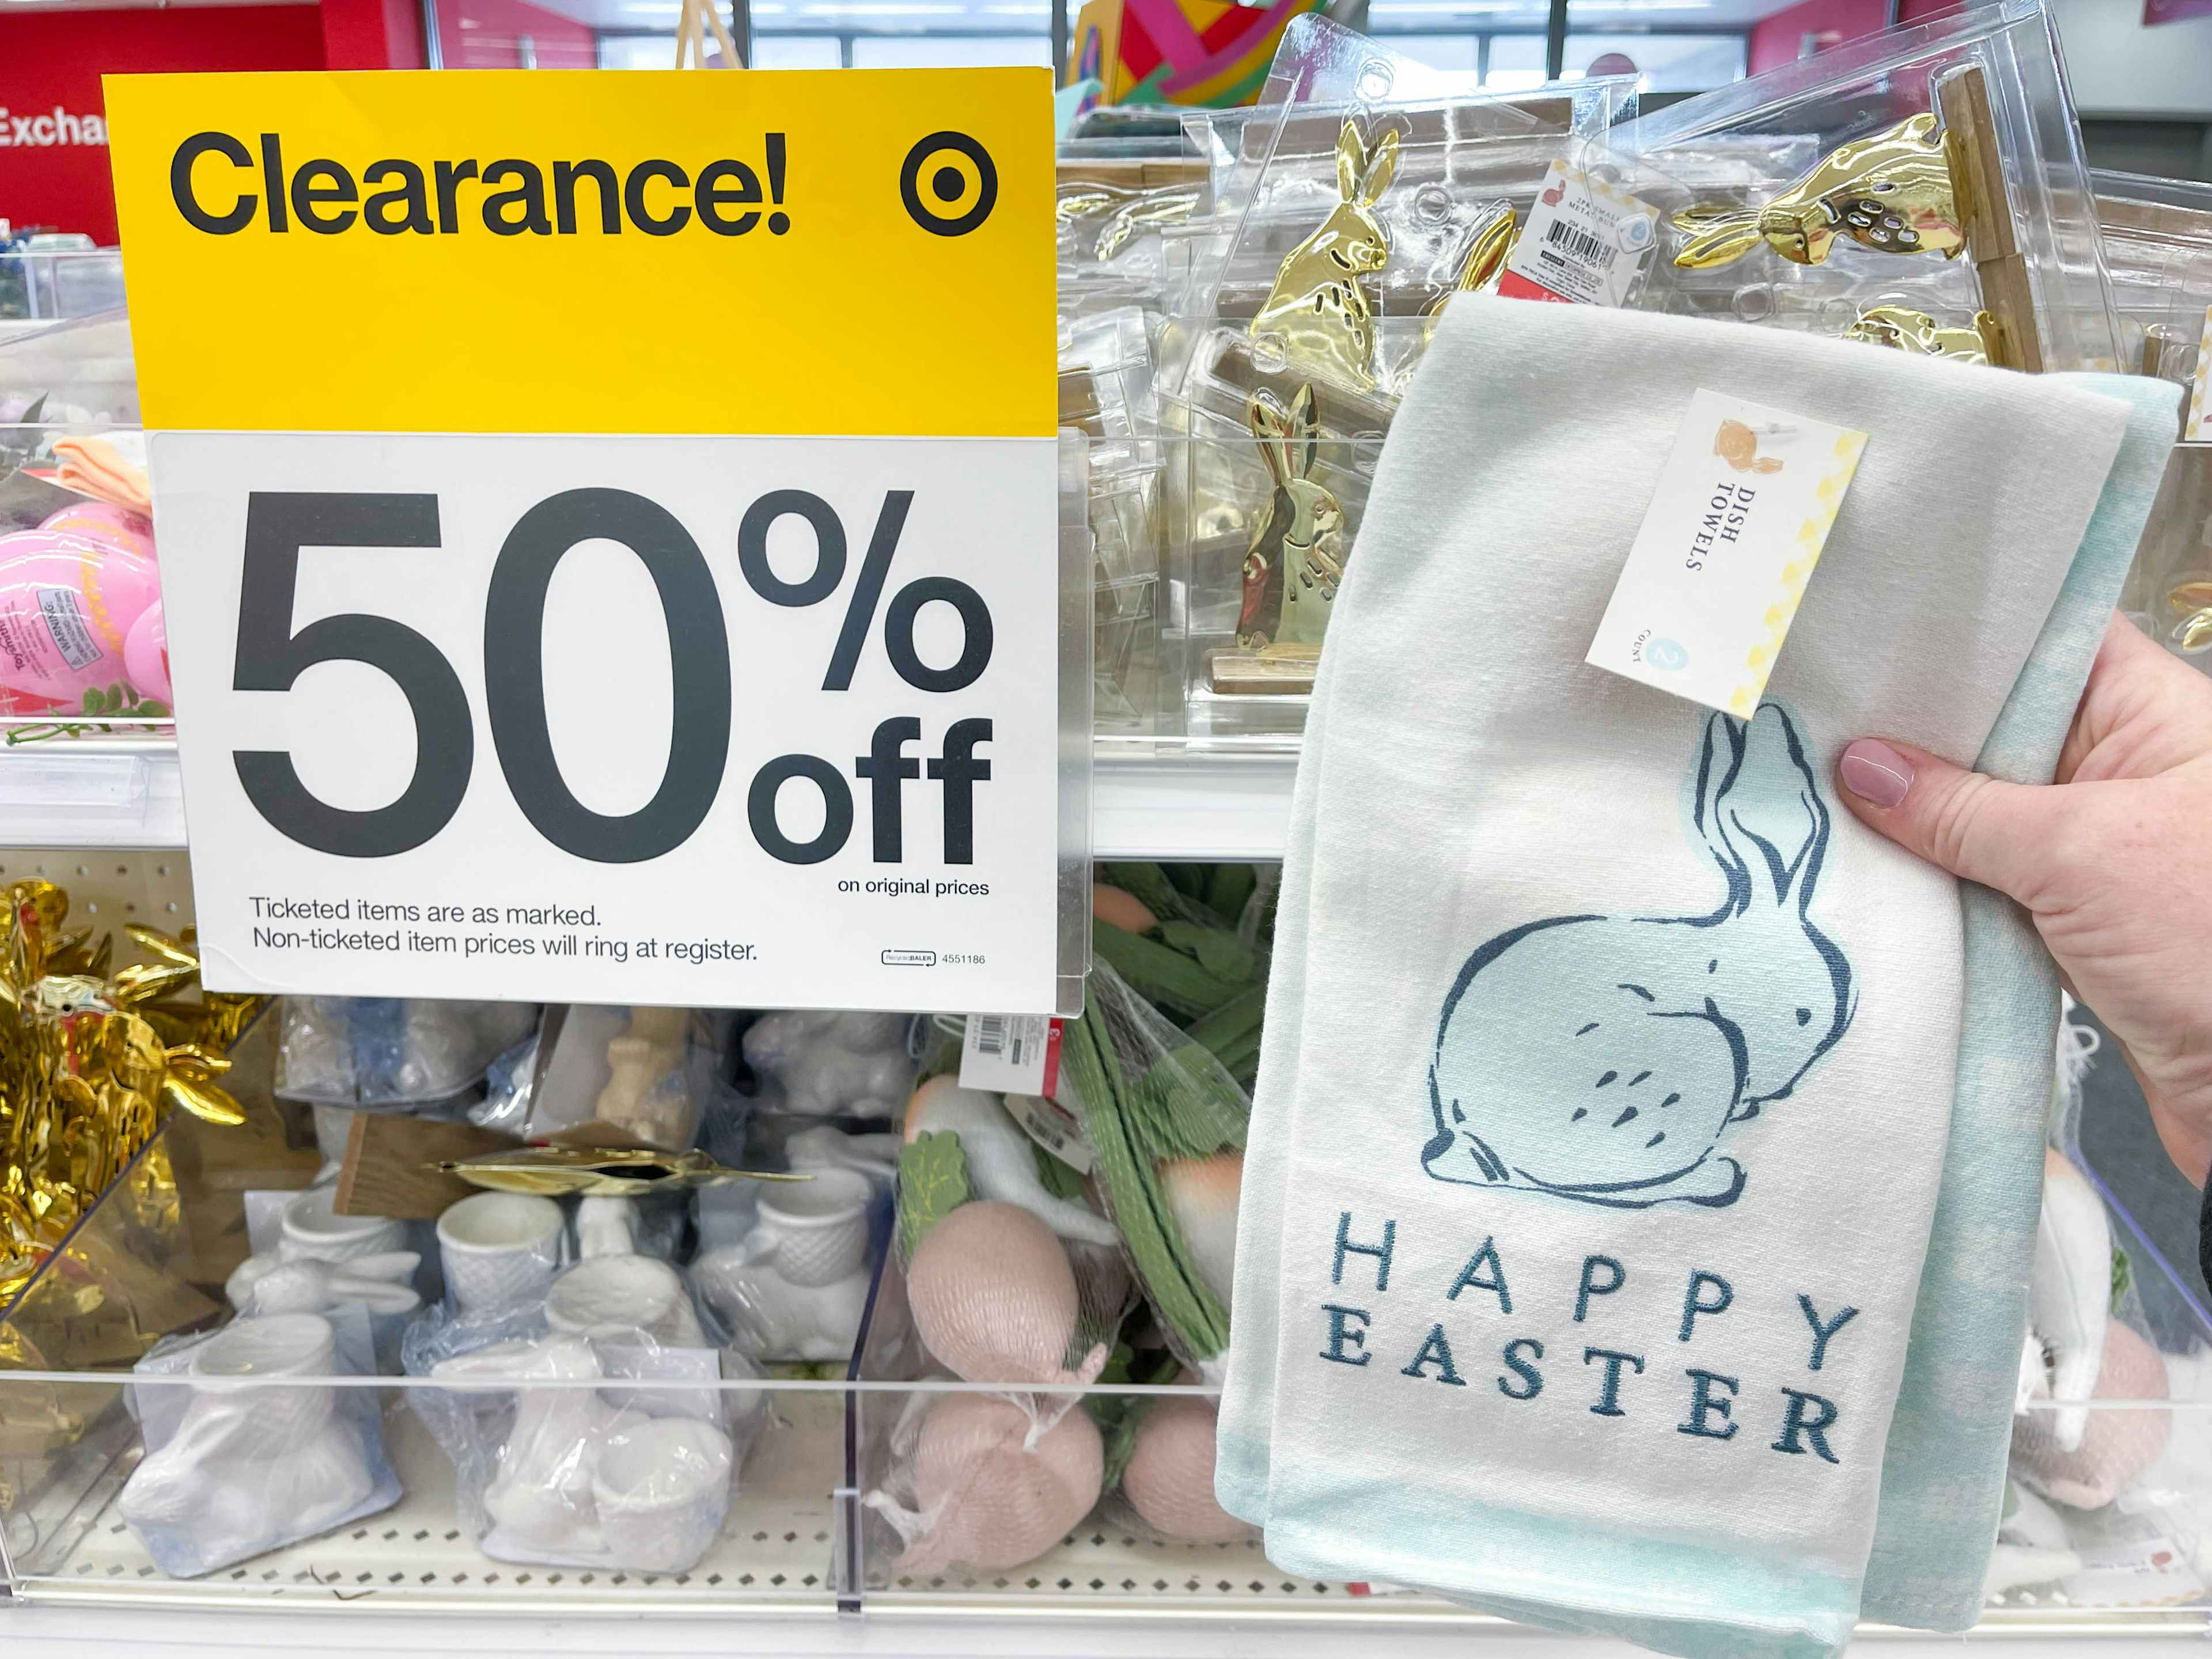 a happy easter hand towel being held in front of clearance sale sign in target